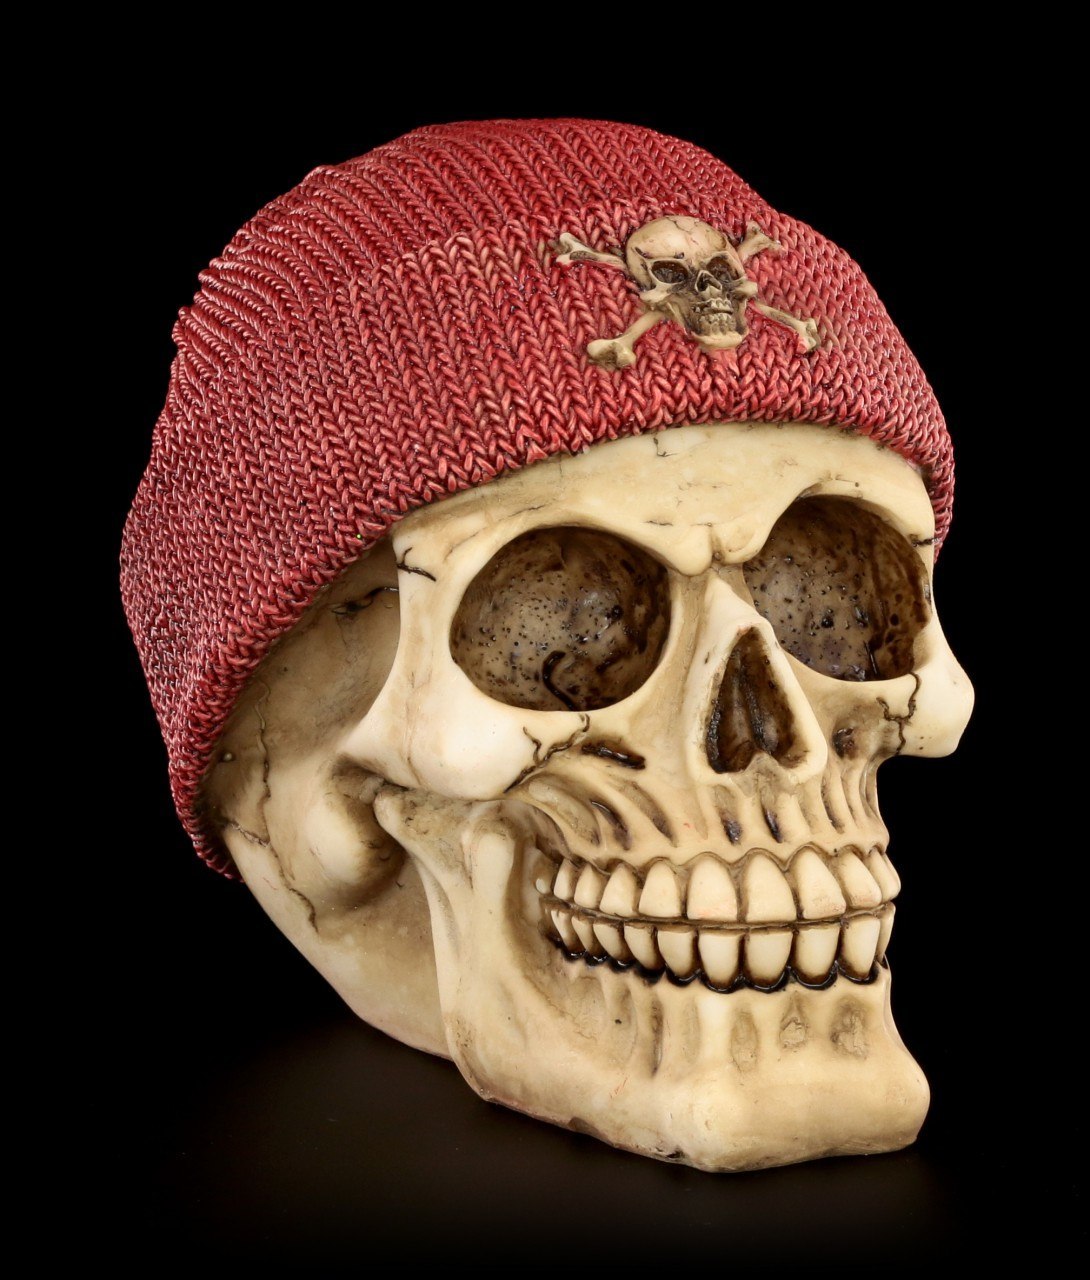 Skull with Beanie - Red